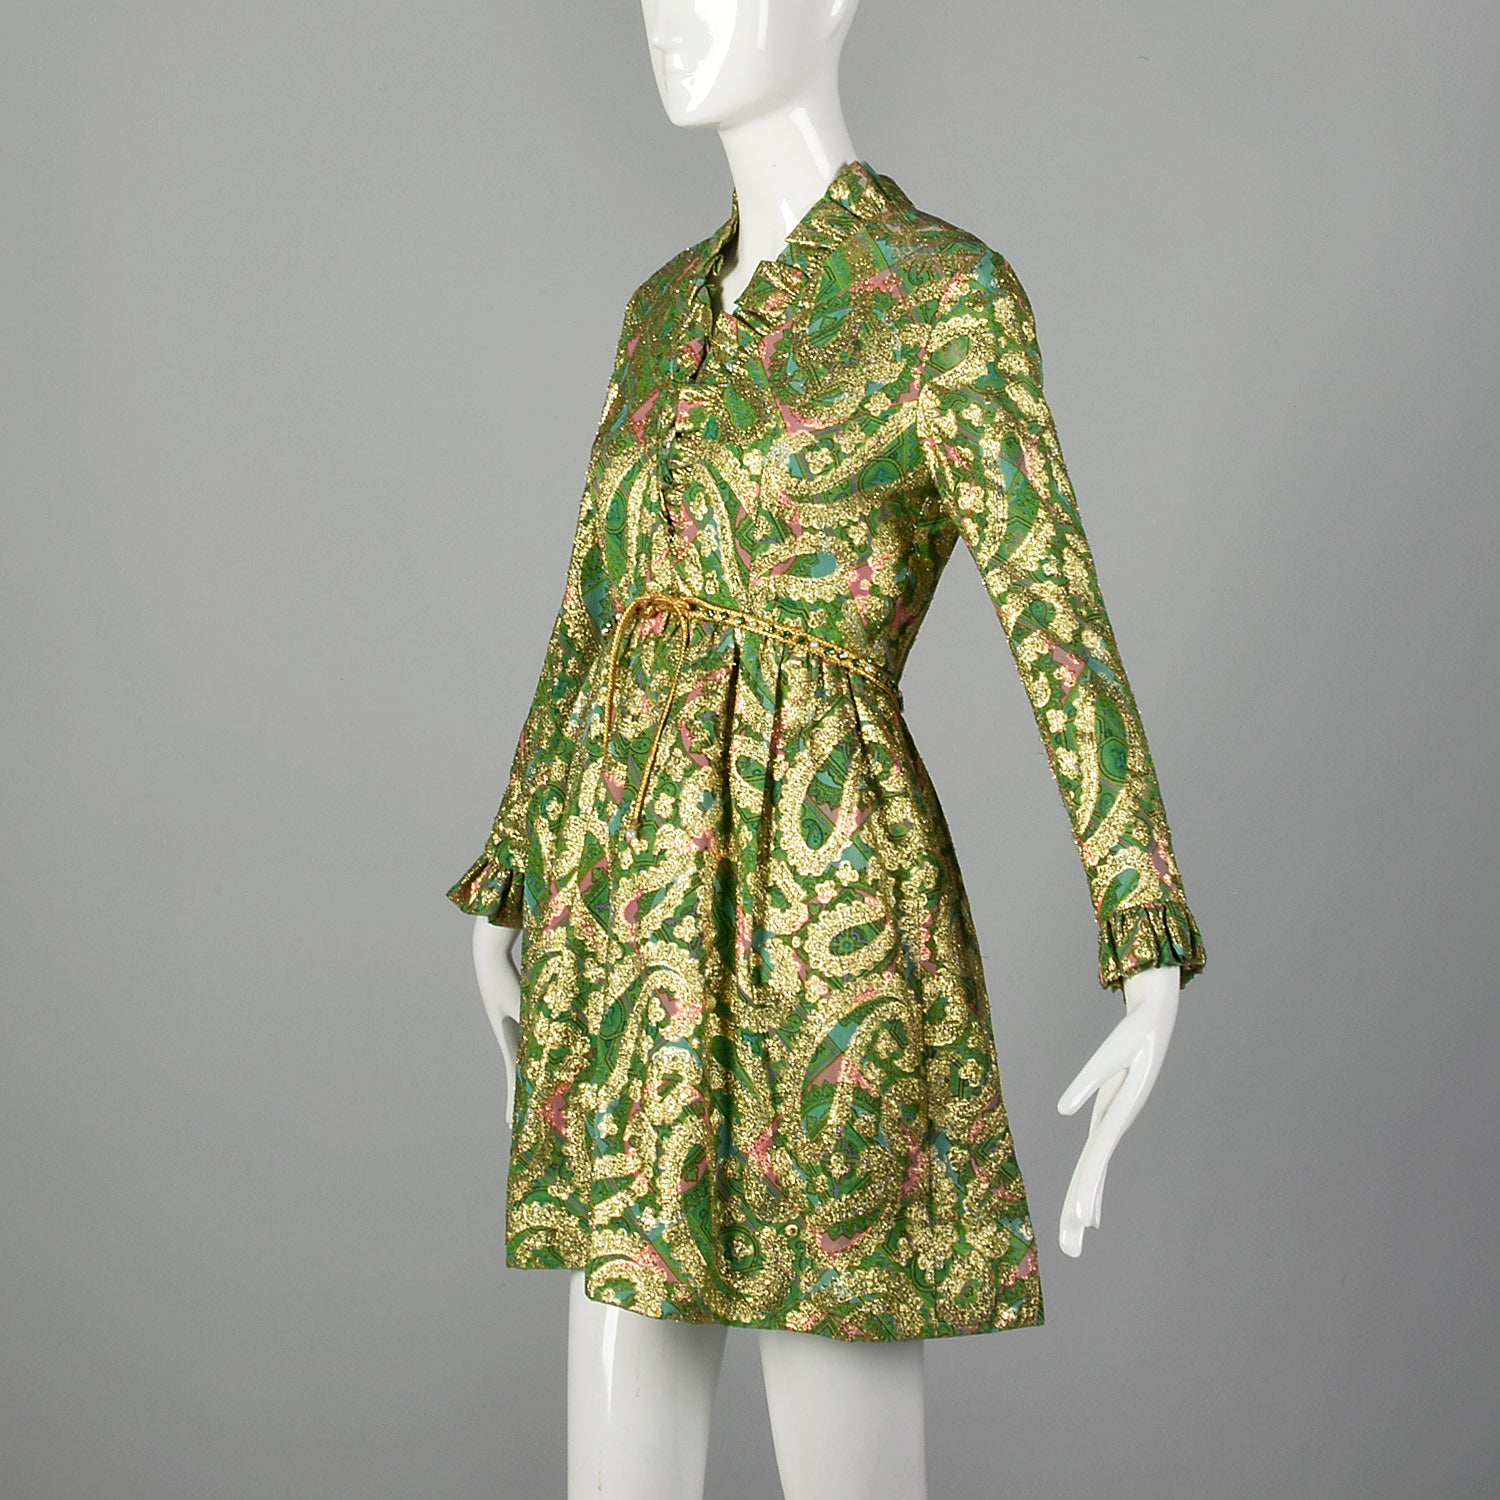 Small Mollie Parnis 1960s Green and Gold Paisley Dress